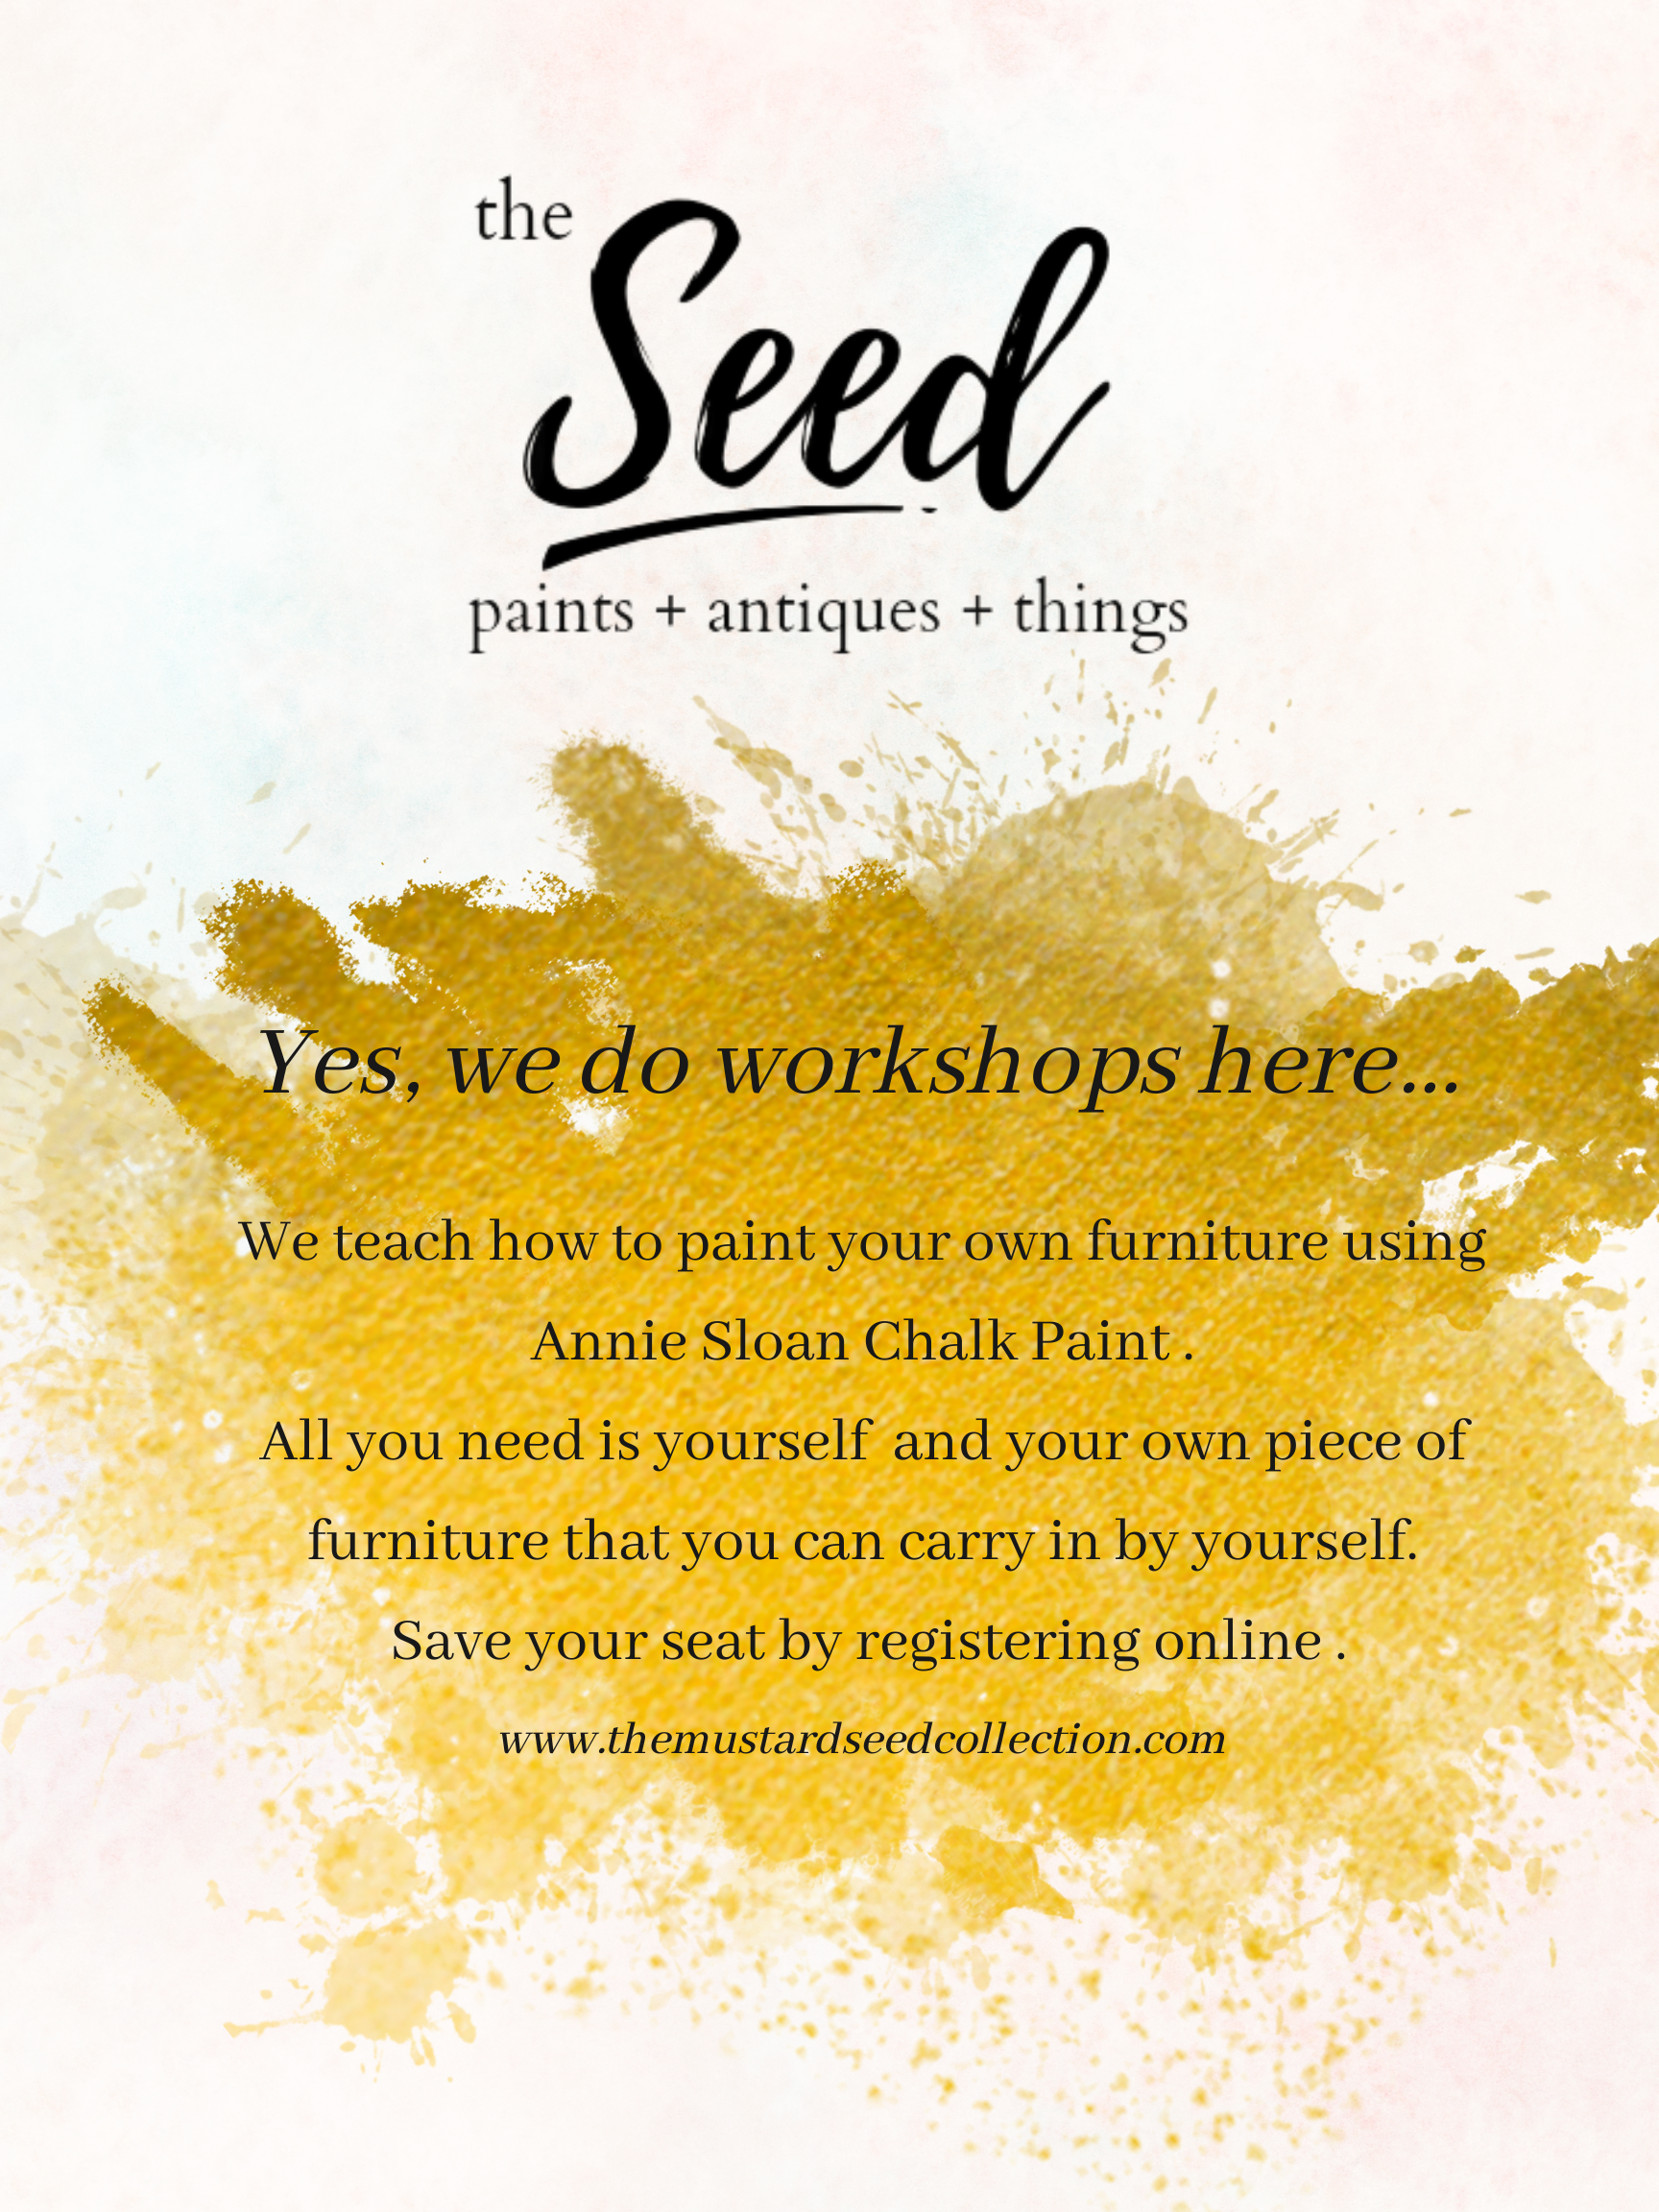 Paint Your Own Furniture Workshop May 23rd 2024 5:30pm-7:30pm or 8pm! Annie Sloan